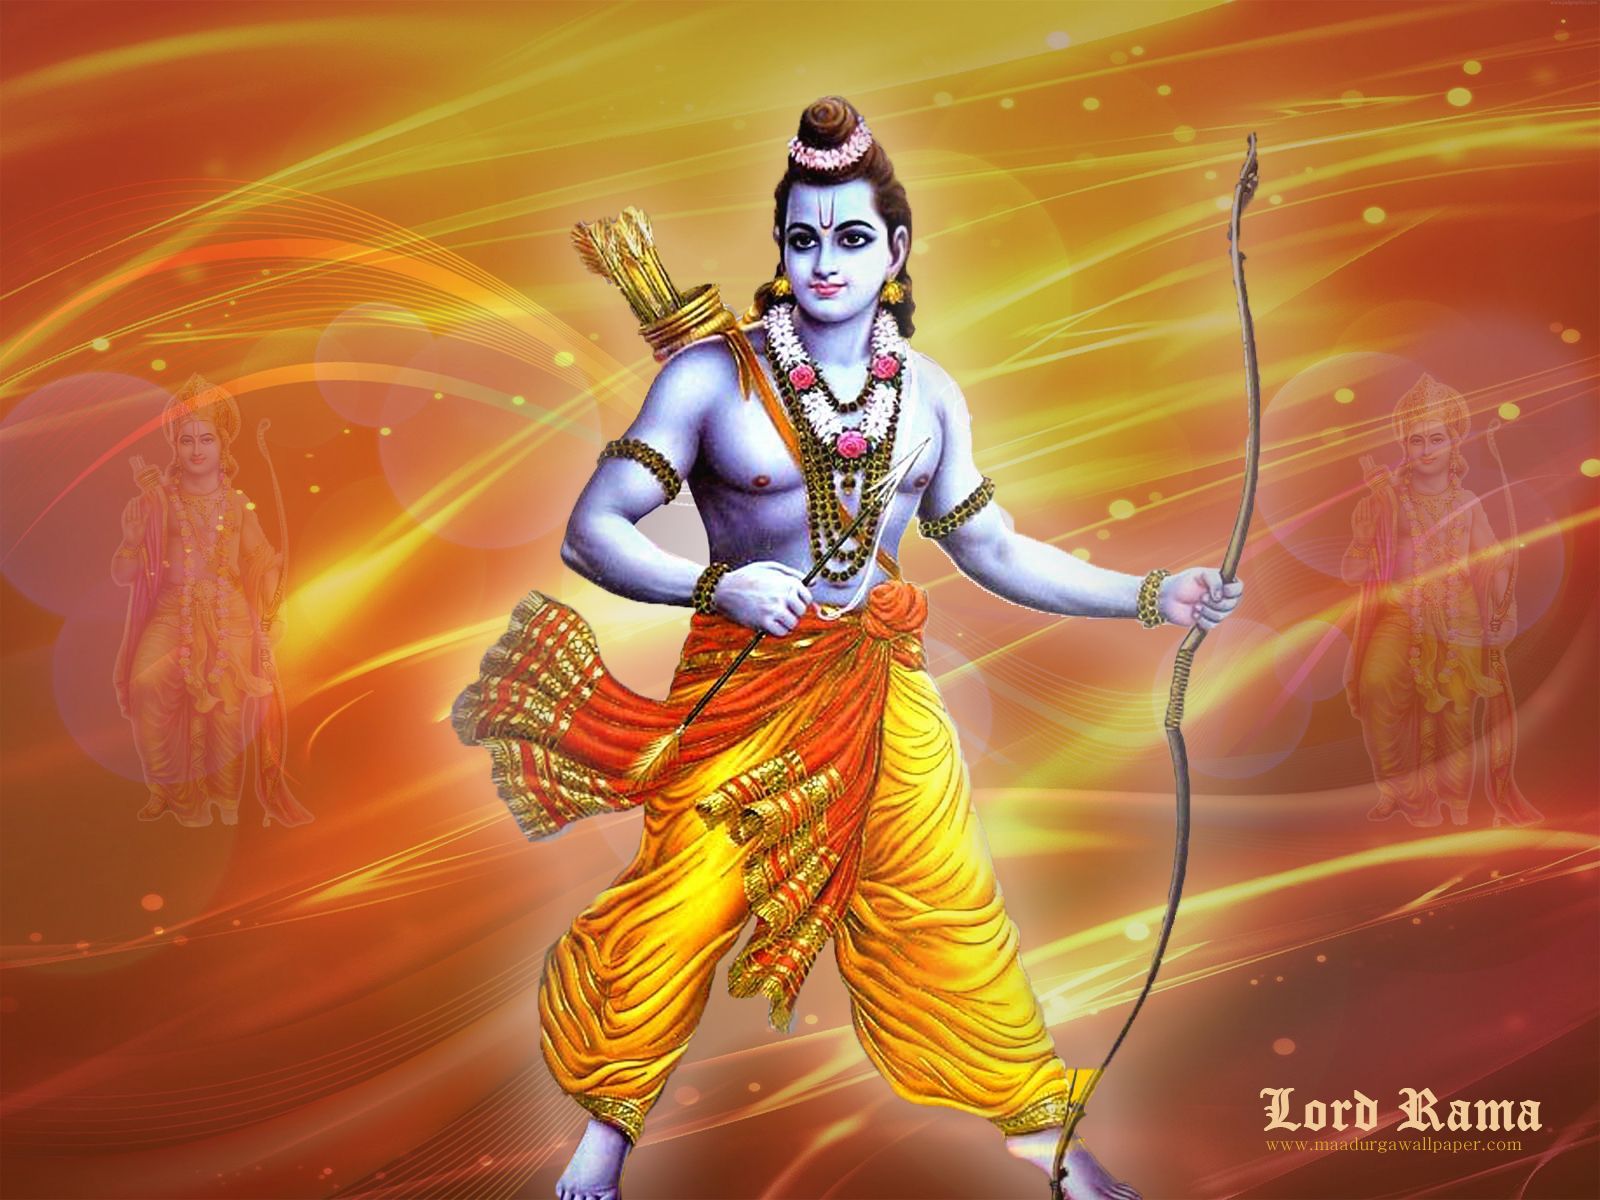 30+ Shri Ram ( श्री राम ) - Pictures and Graphics for different festivals